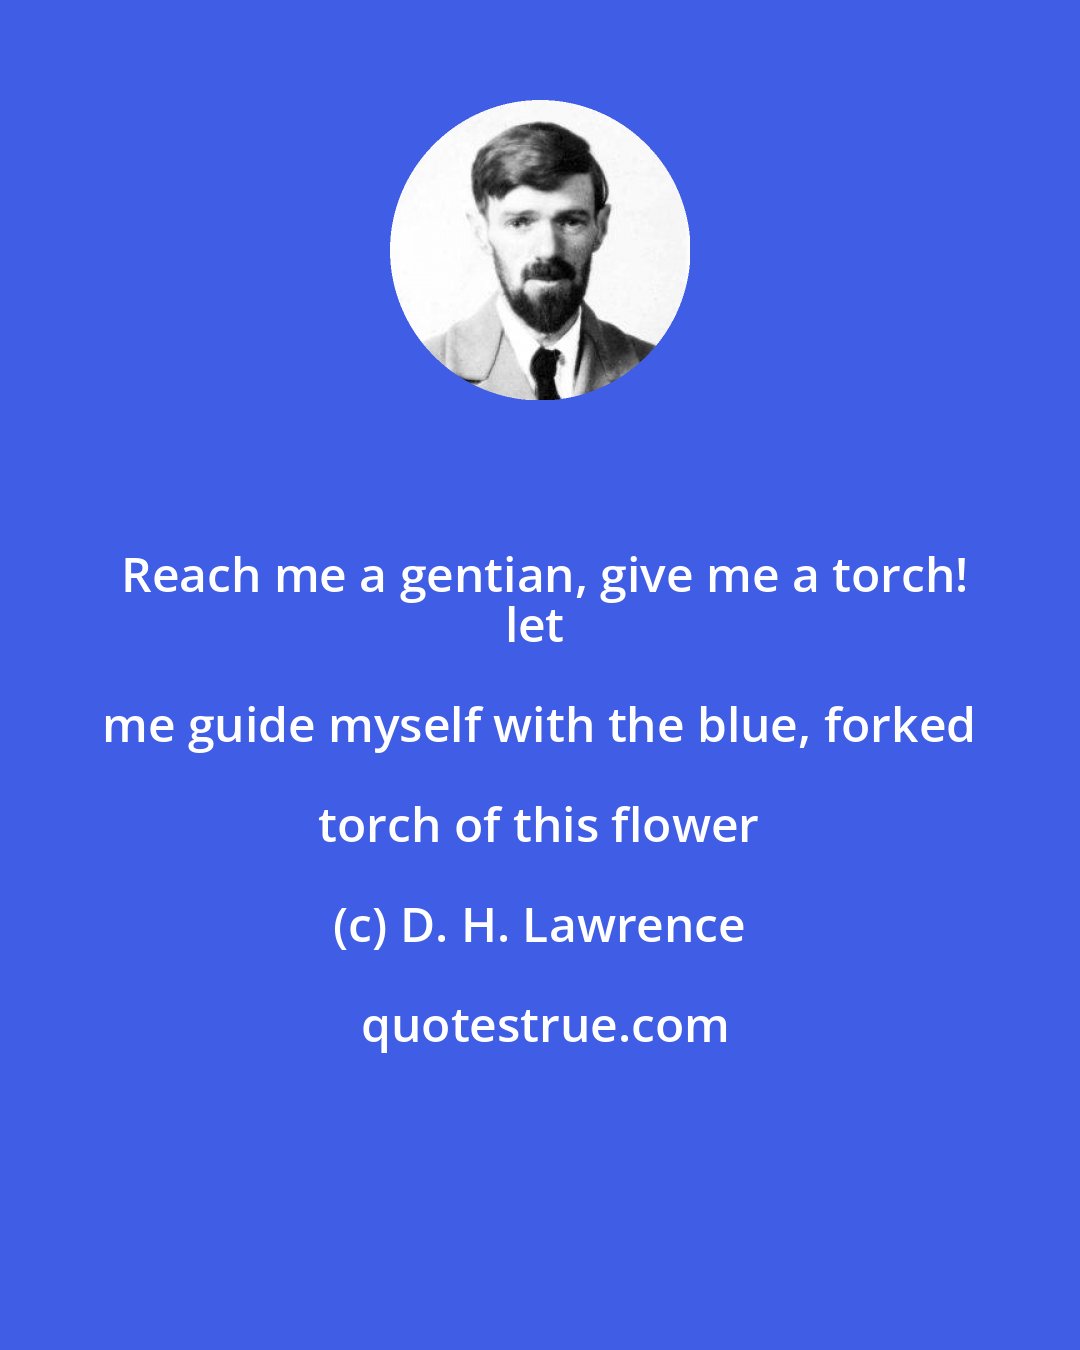 D. H. Lawrence: Reach me a gentian, give me a torch!
let me guide myself with the blue, forked torch of this flower